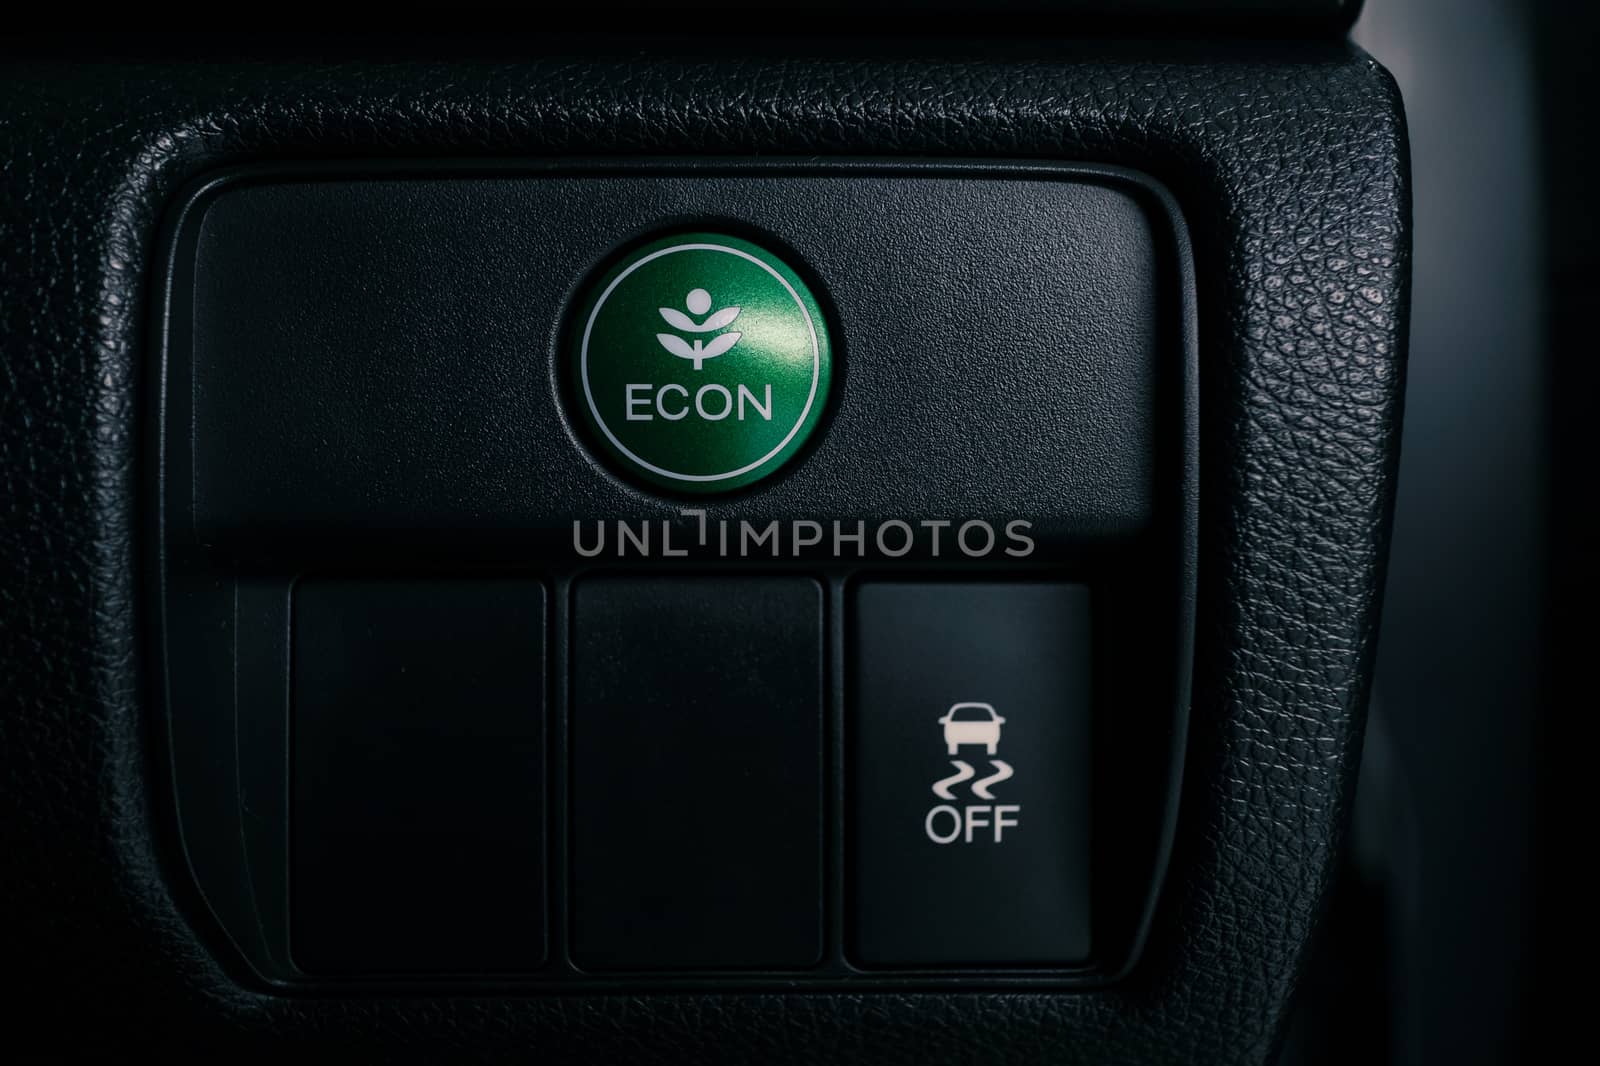 econ button on dashboard of modern car, press the button to switch to a setting that saves energy and to improving fuel efficiency, shallow depth of field